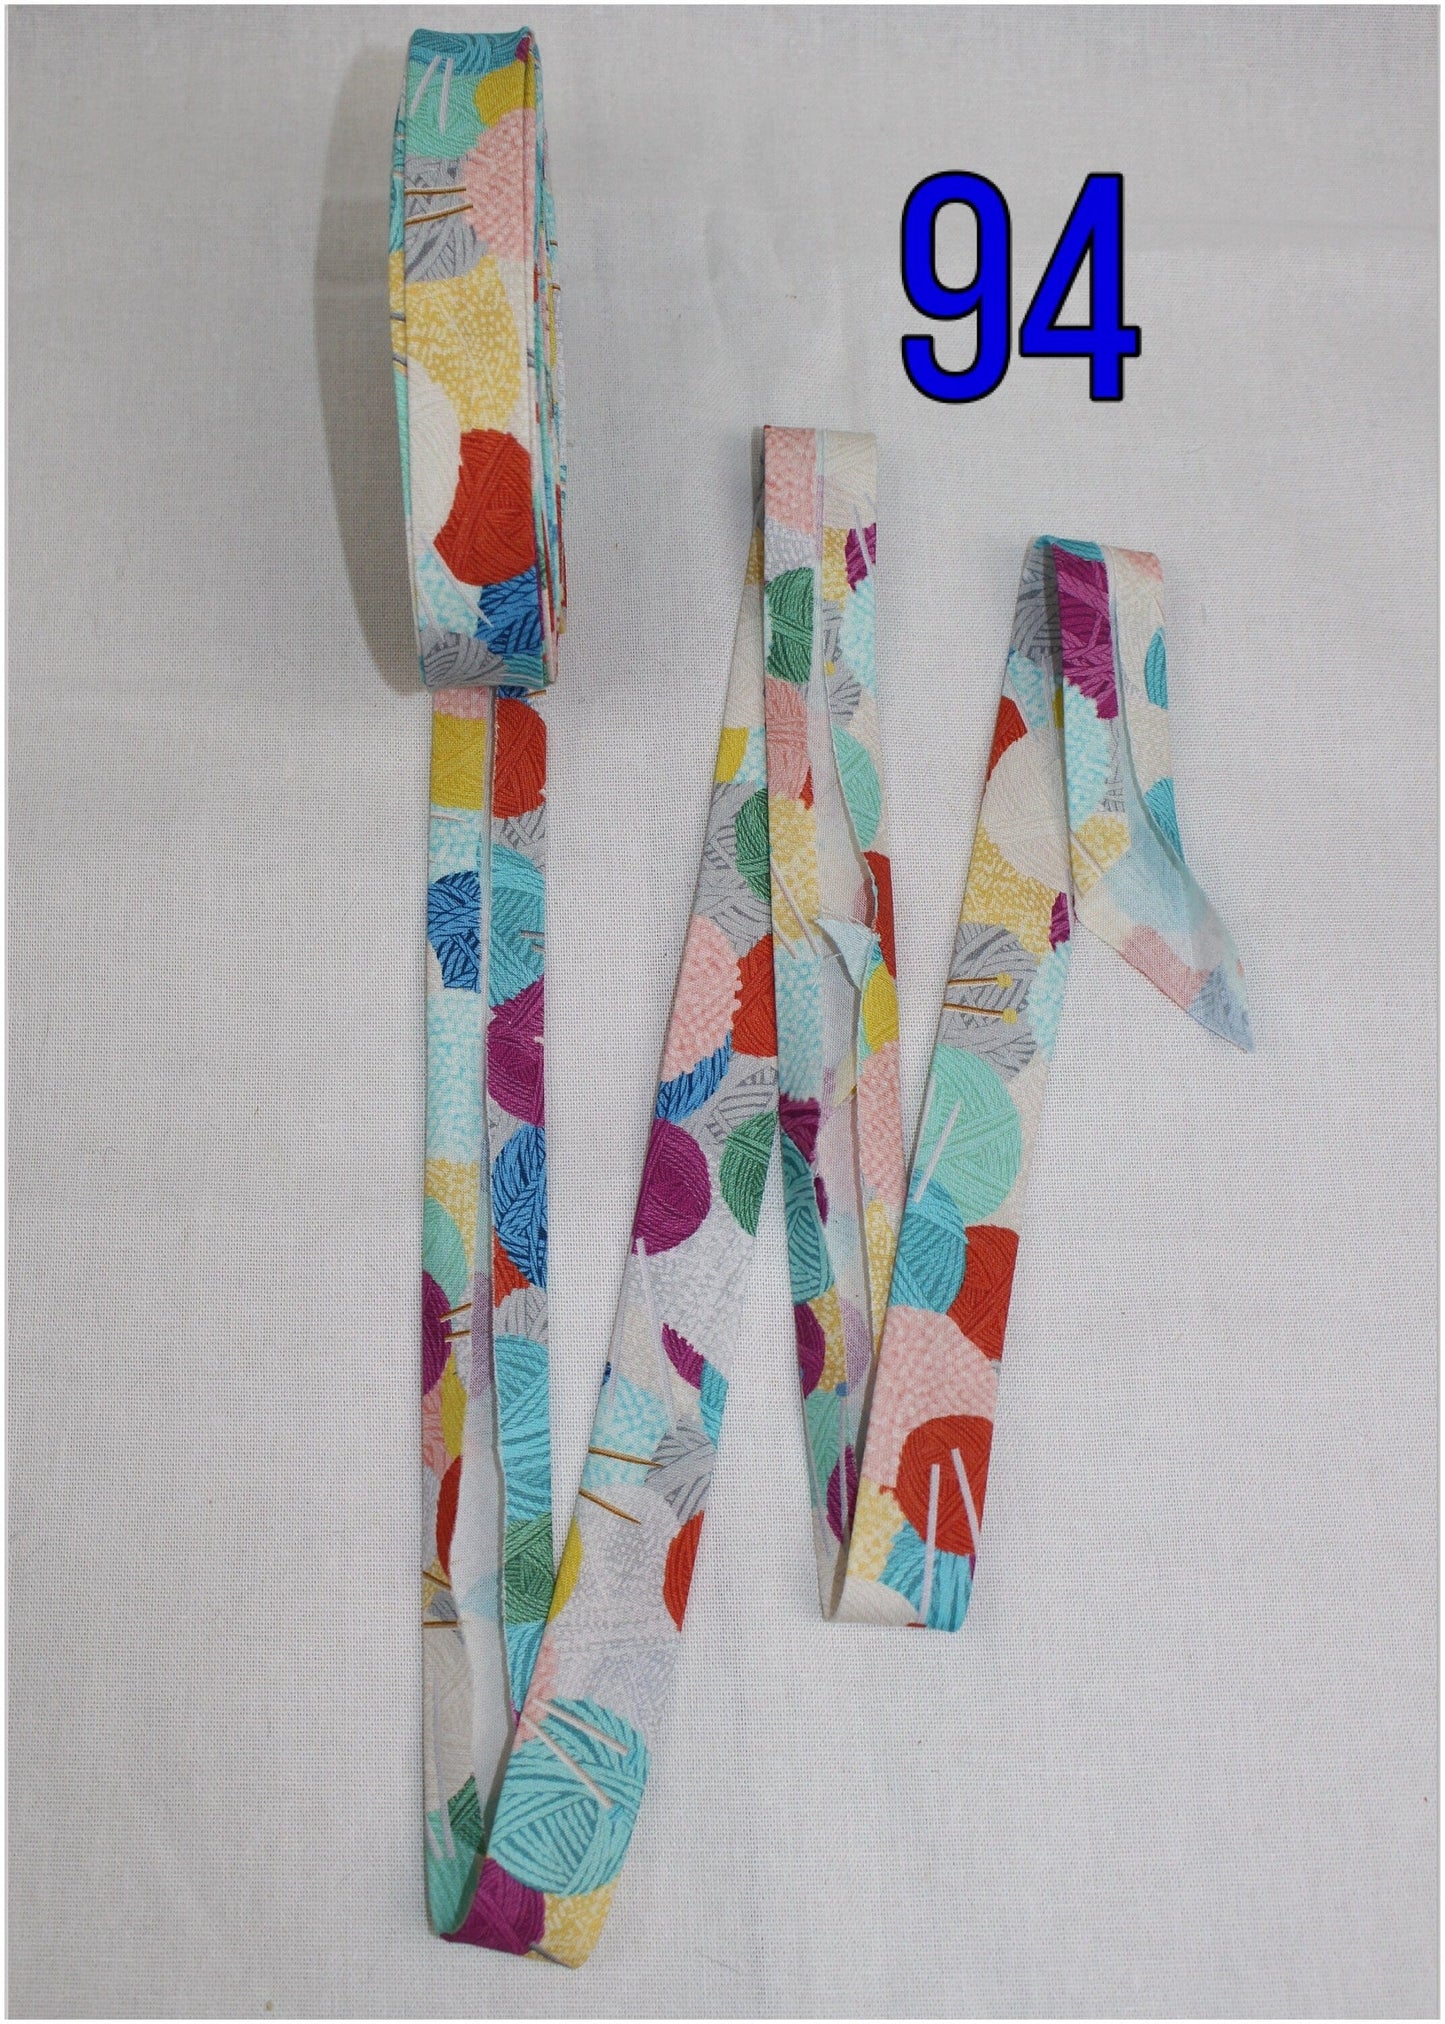 Bias Binding (Tape) 25mm, Cotton, Single Fold. Fusible iron on available. Wool, mermaid scales, flowers, floral, colourful.